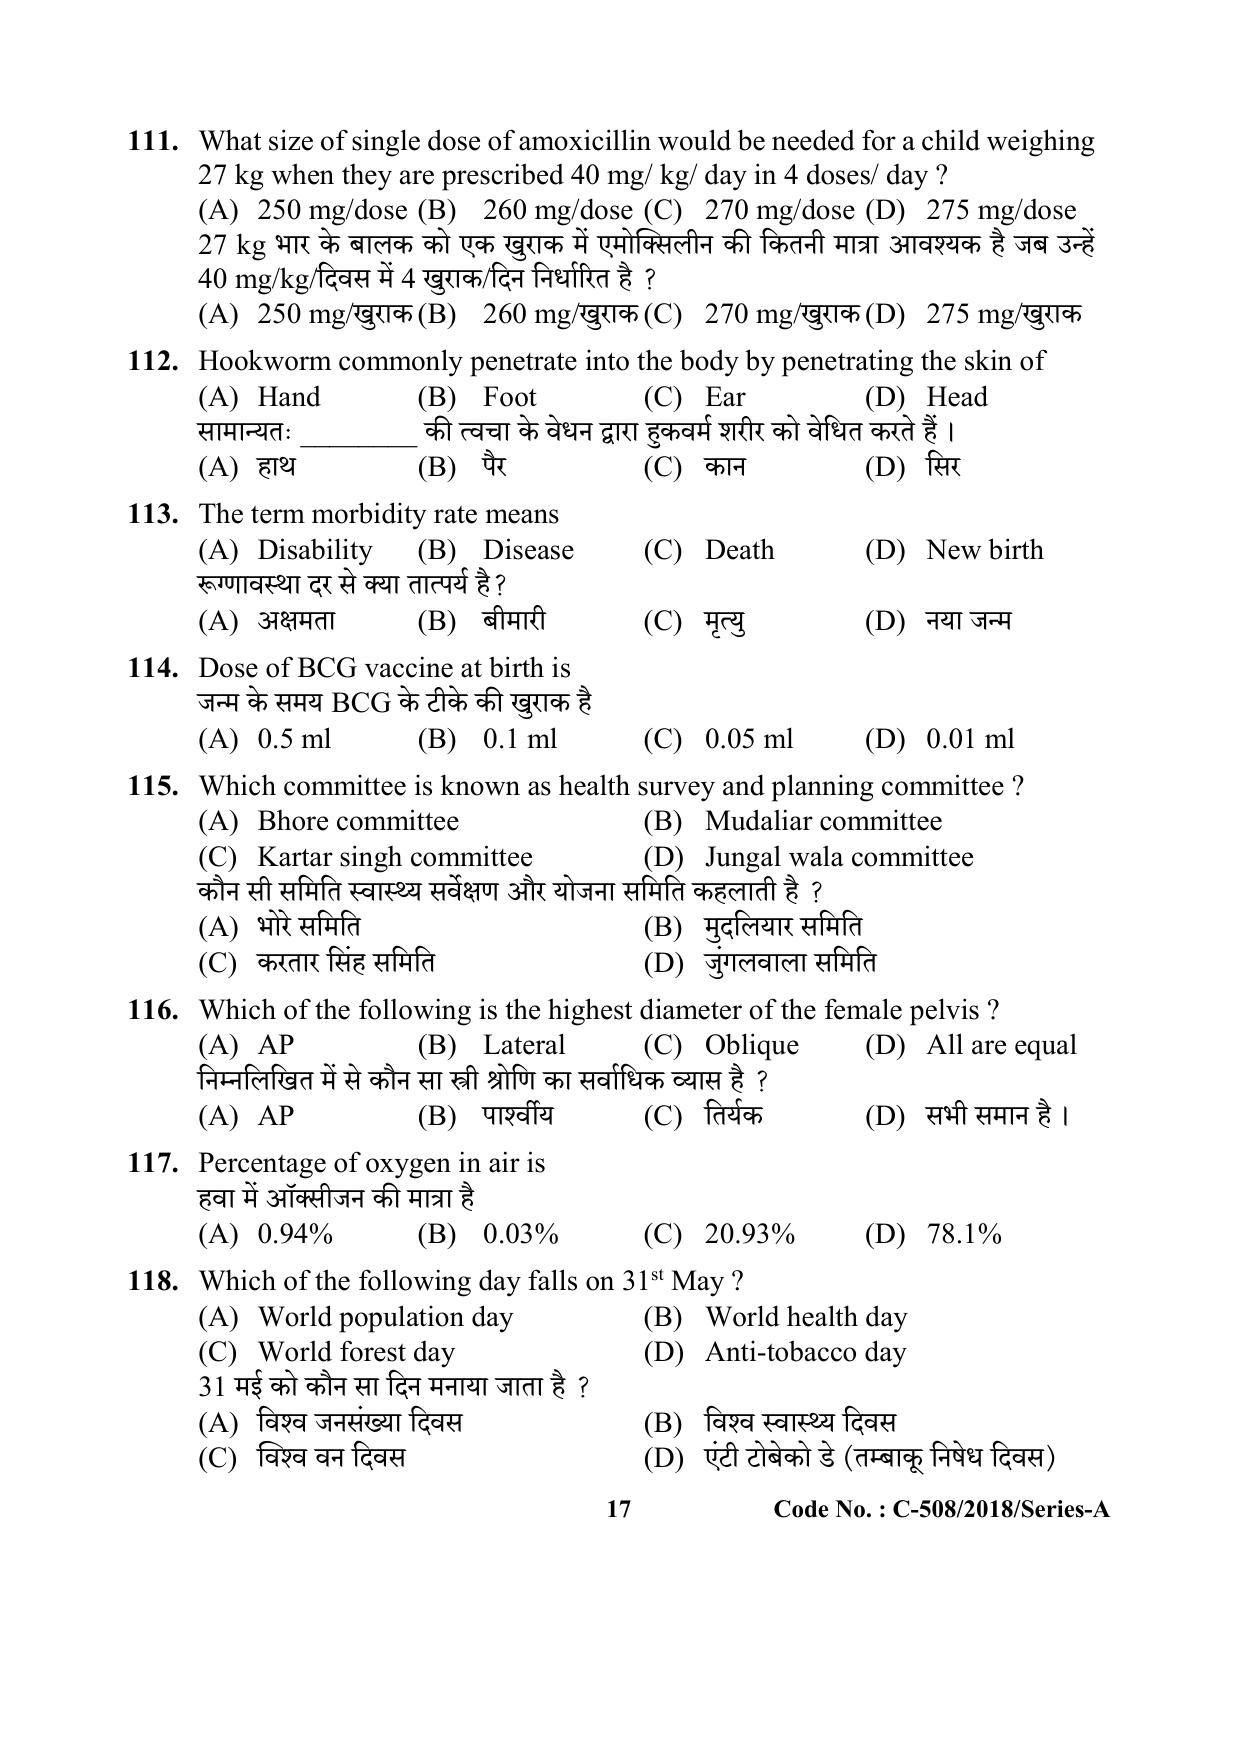 UP Health Worker Thematic Knowledge Previous Year Question Paper - Page 17